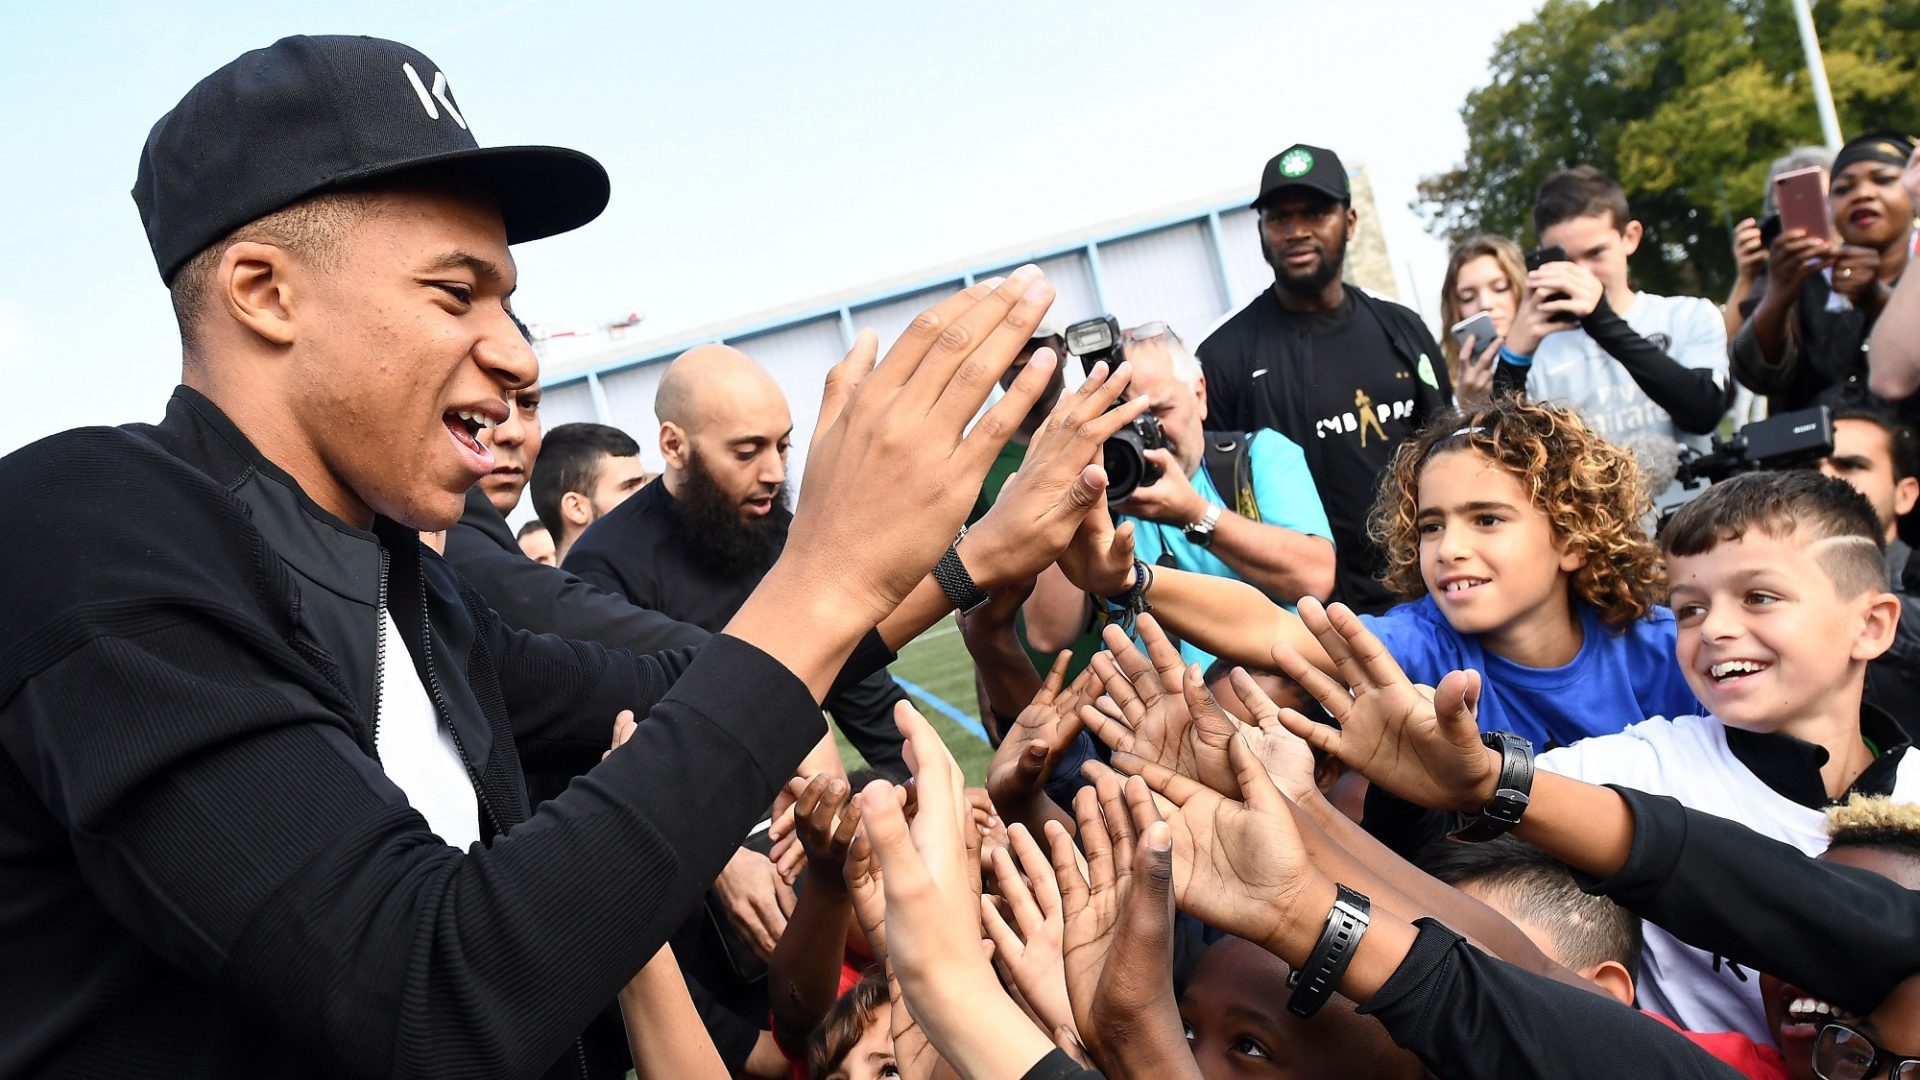 Kylian Mbappé greets fans on his return to Bondy after France’s victory in the 2018 World Cup in Russia. Photo: Franck Fife/AFP/Getty